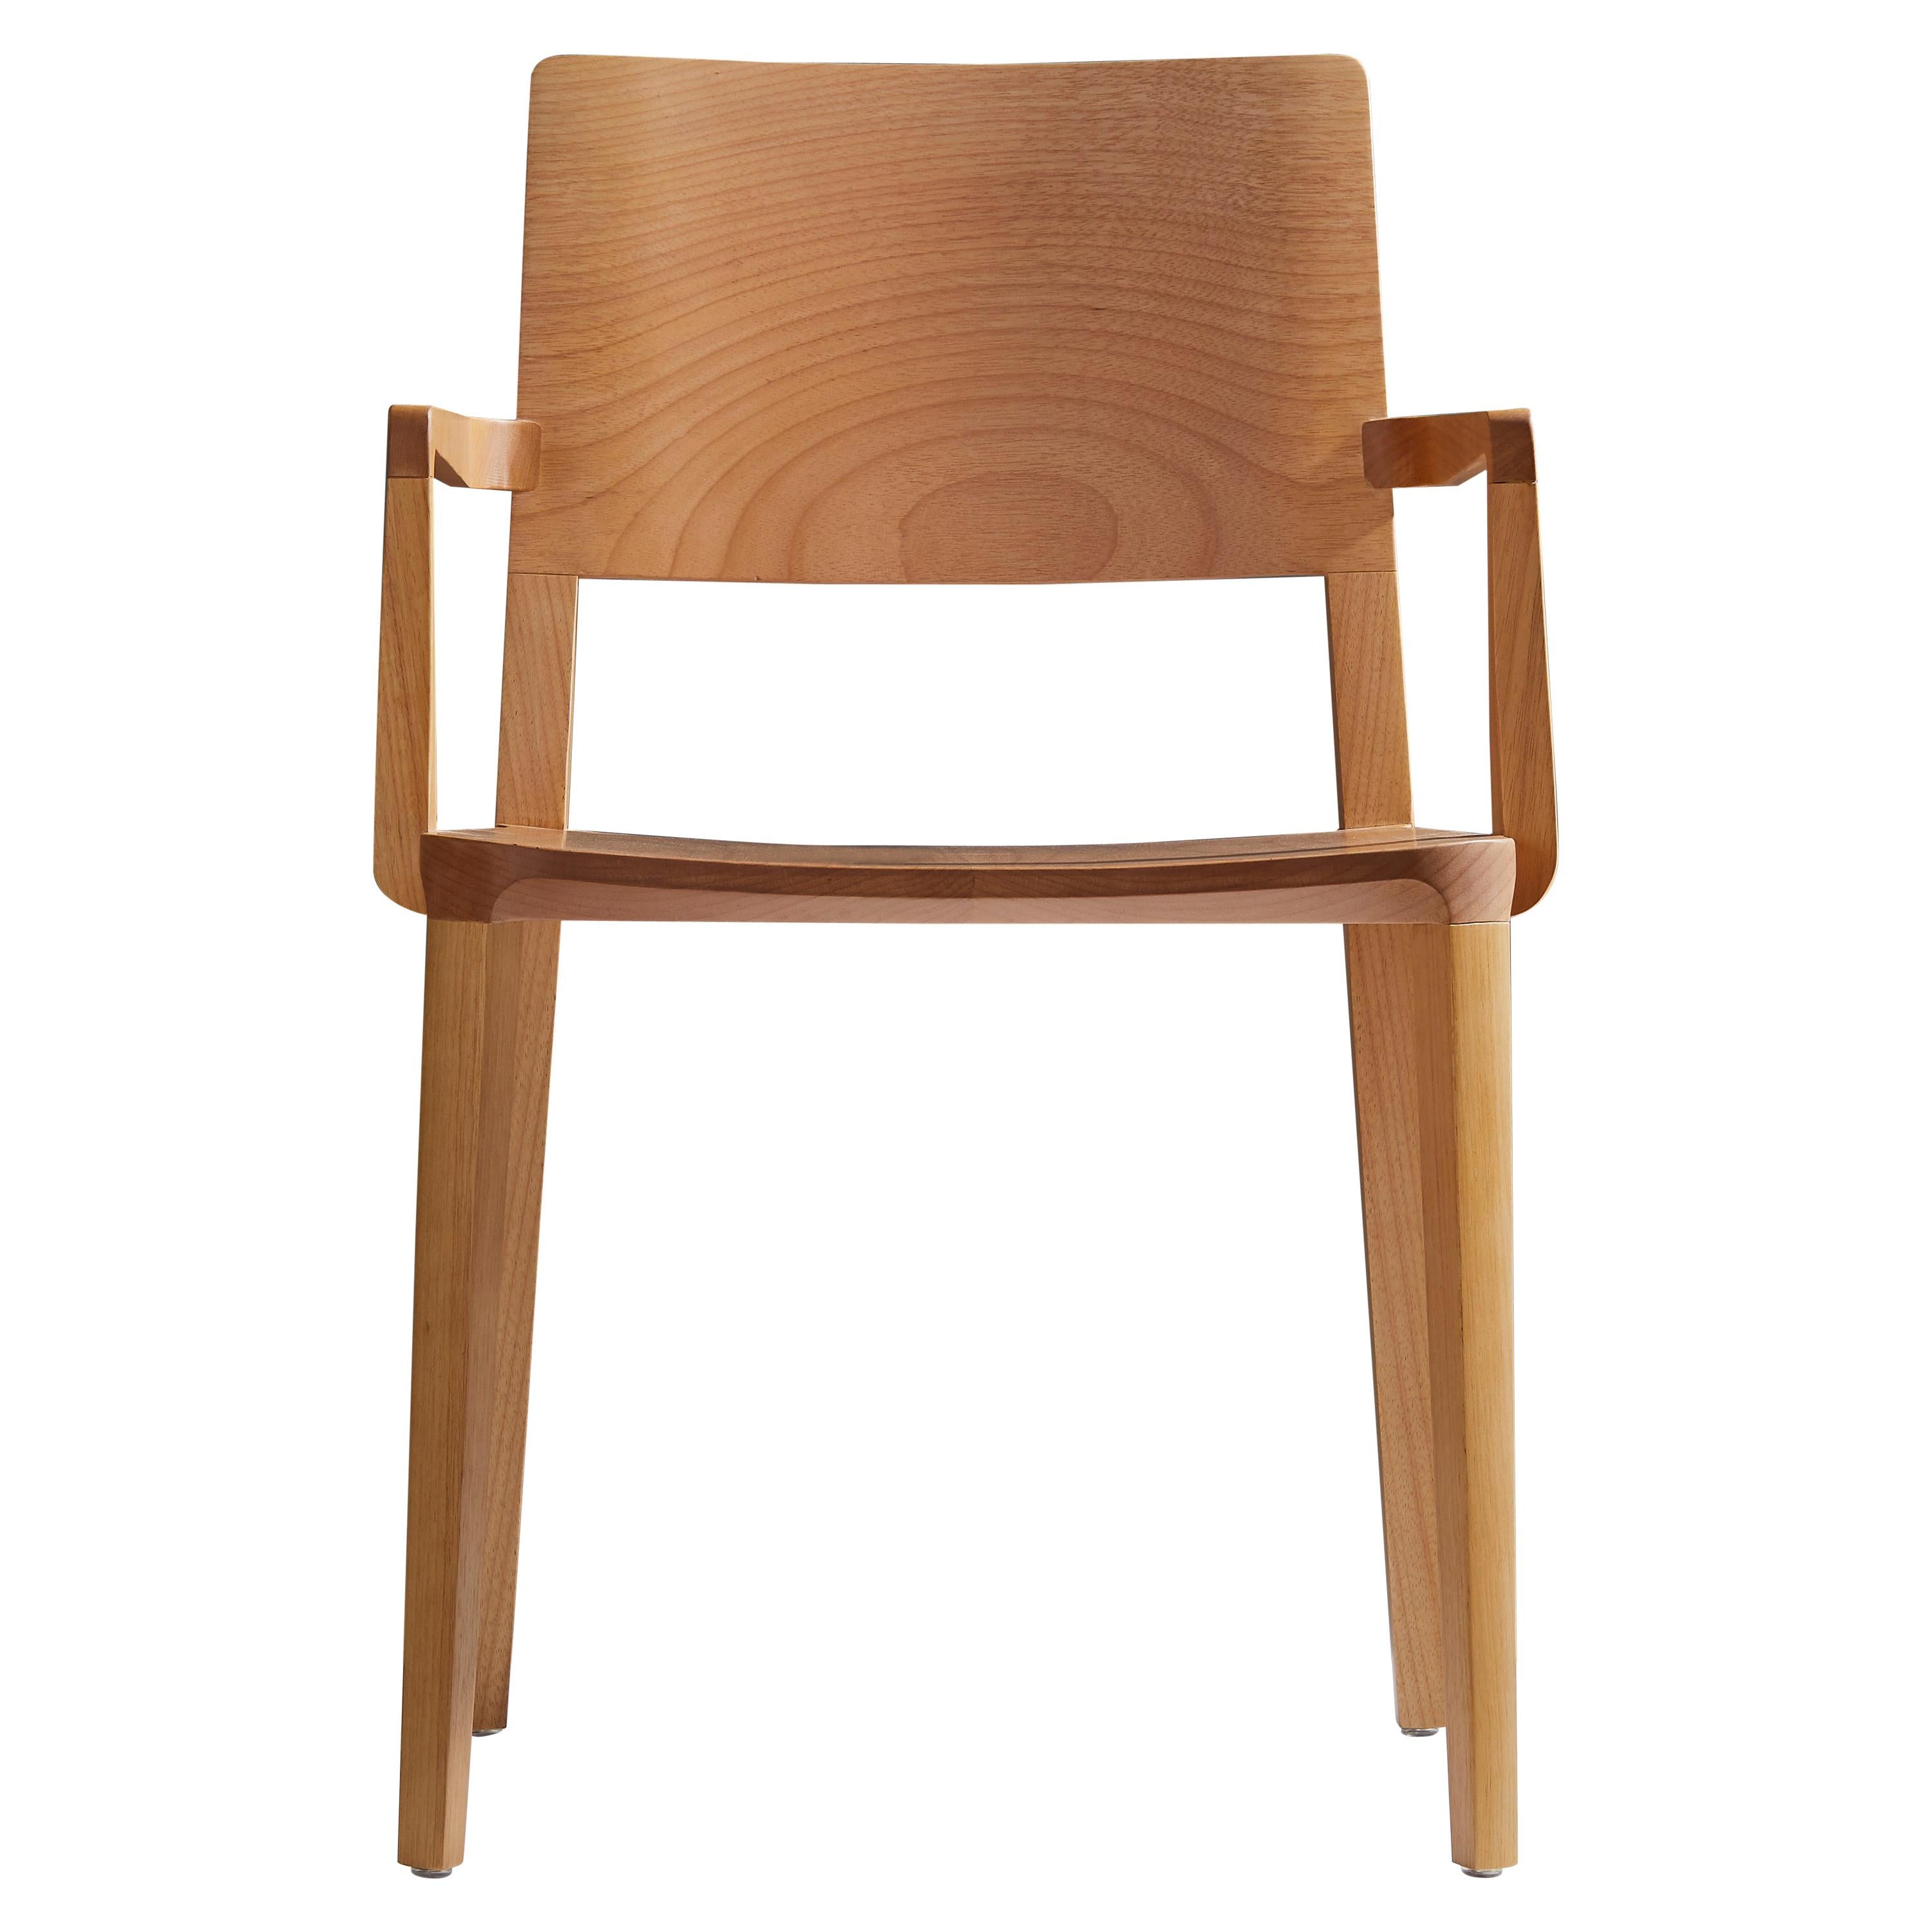 Evo chair collection.

Our Evo collection is based in the harmonic fusion between geometrical forms and the modern interpretation of wood archetypes. 

All elements that compose the chair are precisely engineered to input full hardwood blocks to